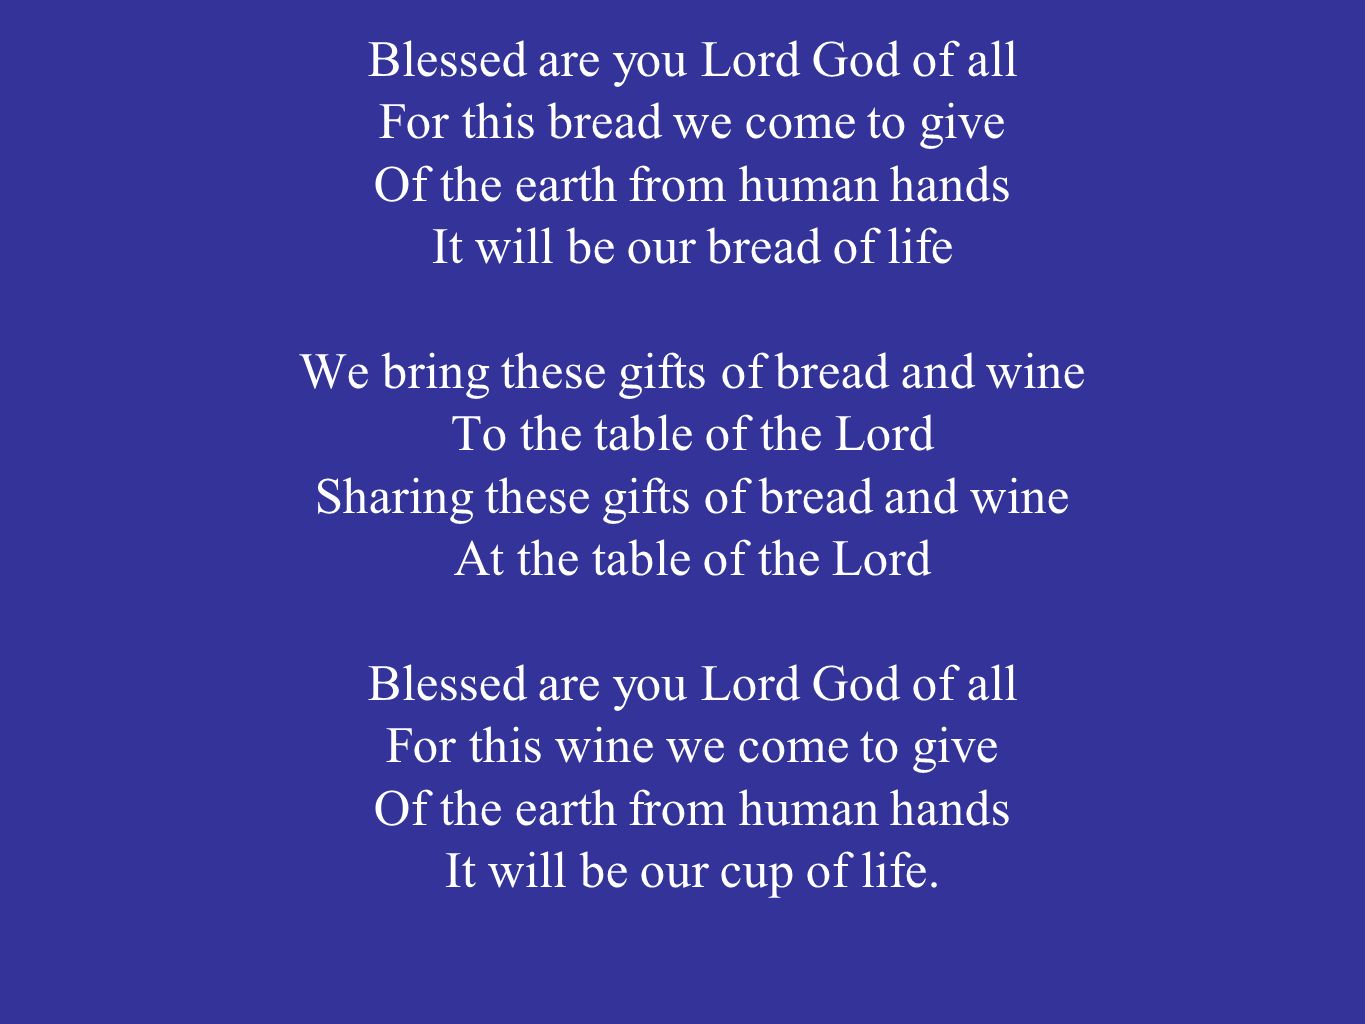 Blessed are you Lord God of all For this bread we come to give Of the earth from human hands It will be our bread of life We bring these gifts of bread and wine To the table of the Lord Sharing these gifts of bread and wine At the table of the Lord Blessed are you Lord God of all For this wine we come to give Of the earth from human hands It will be our cup of life.